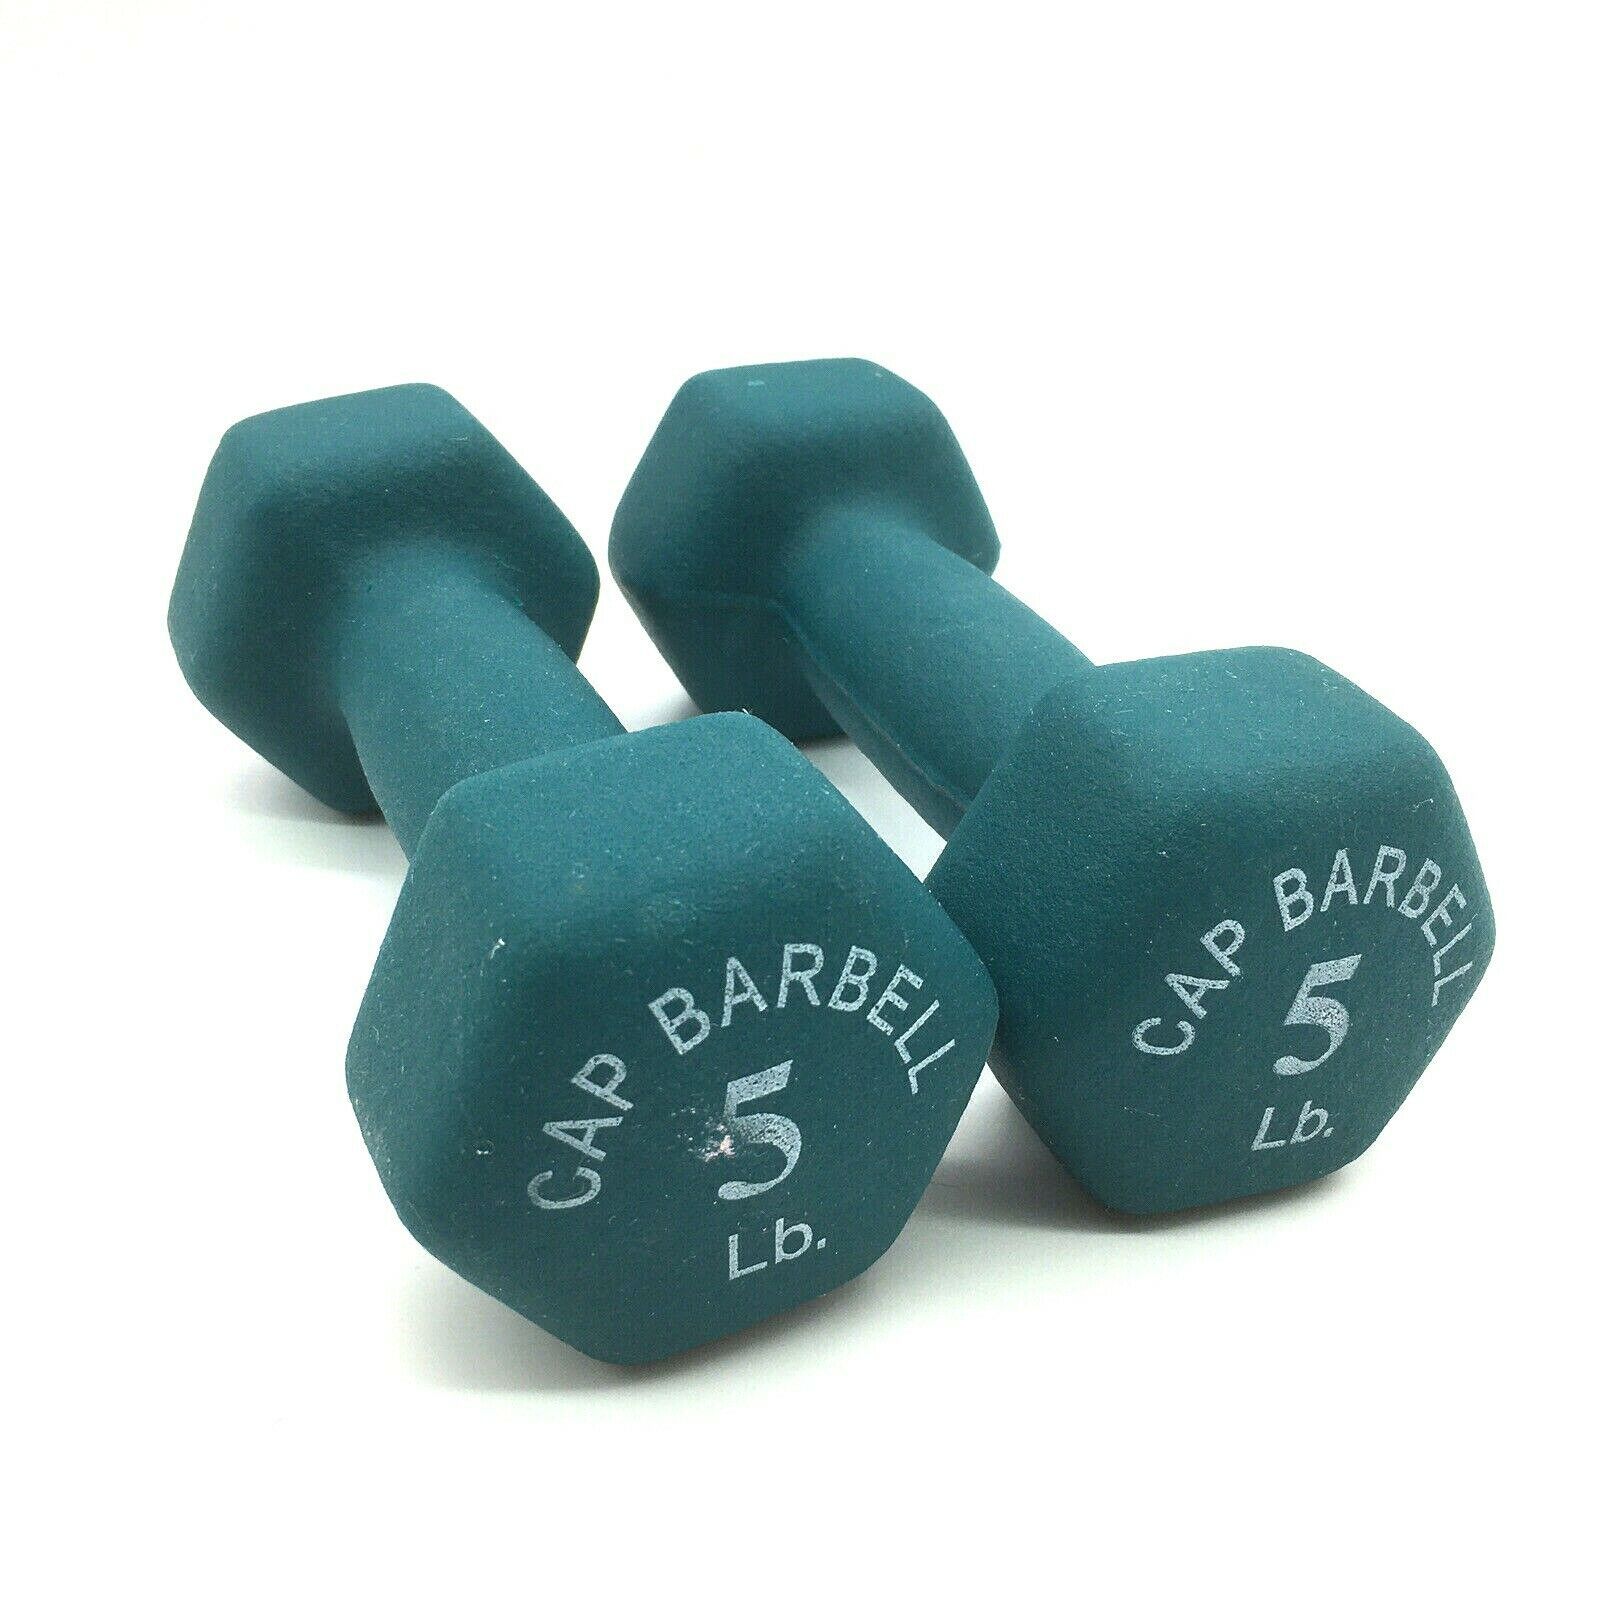 Primary image for Set of 2 5lb Pound Barbell Dumbells CAP Hex Neoprene Weights 10lb total